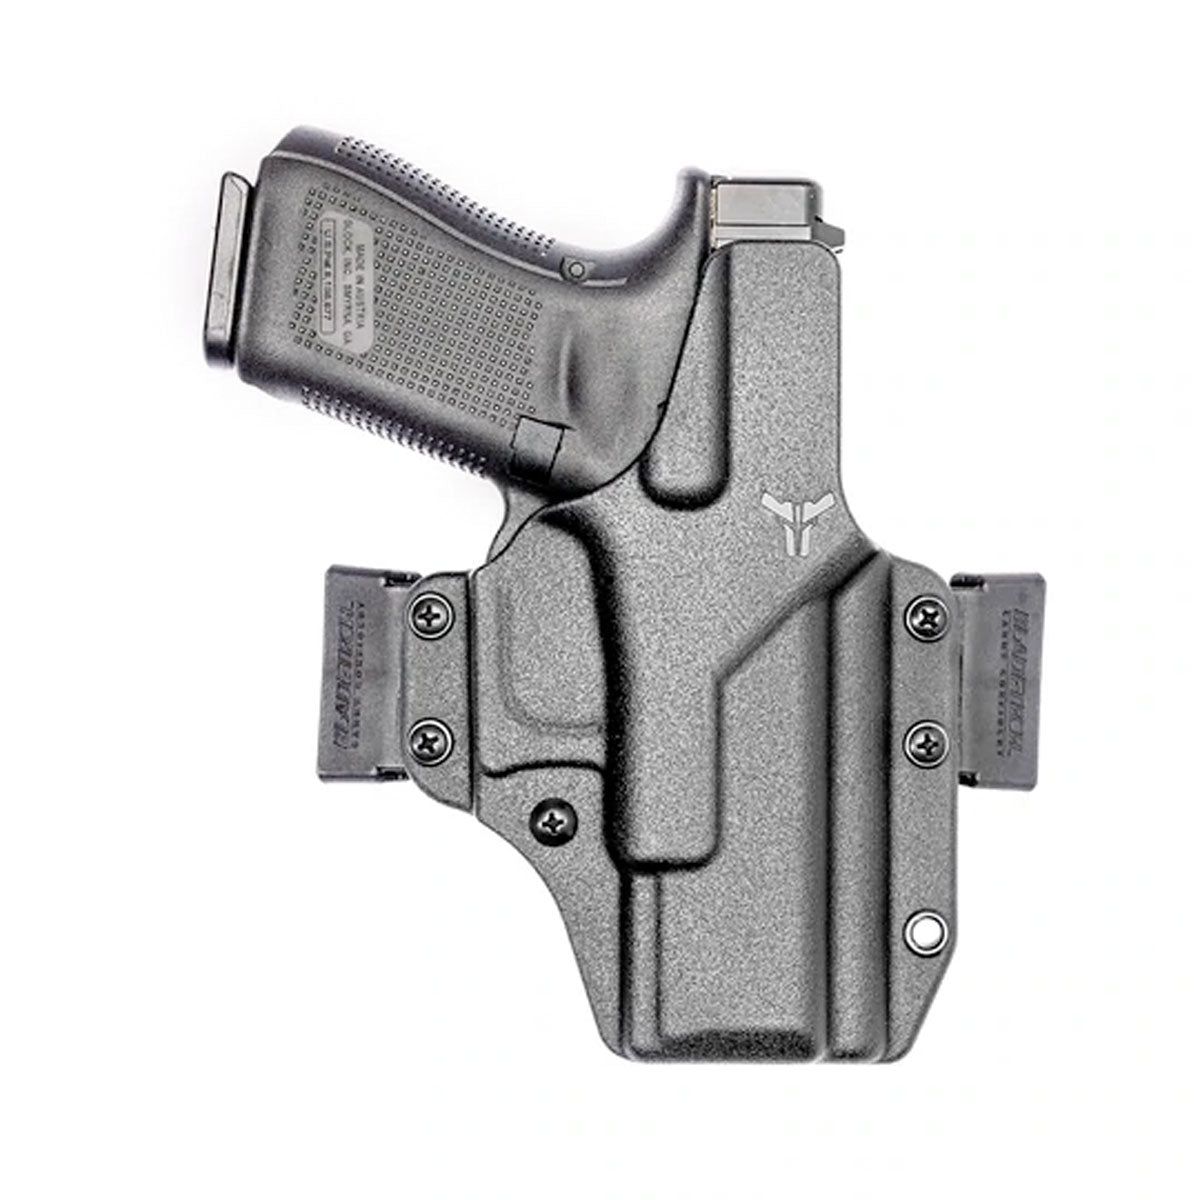 Blade-Tech Total Eclipse OWB Holster Holsters Blade-Tech Holsters Polymer 80 G19 Tactical Gear Supplier Tactical Distributors Australia